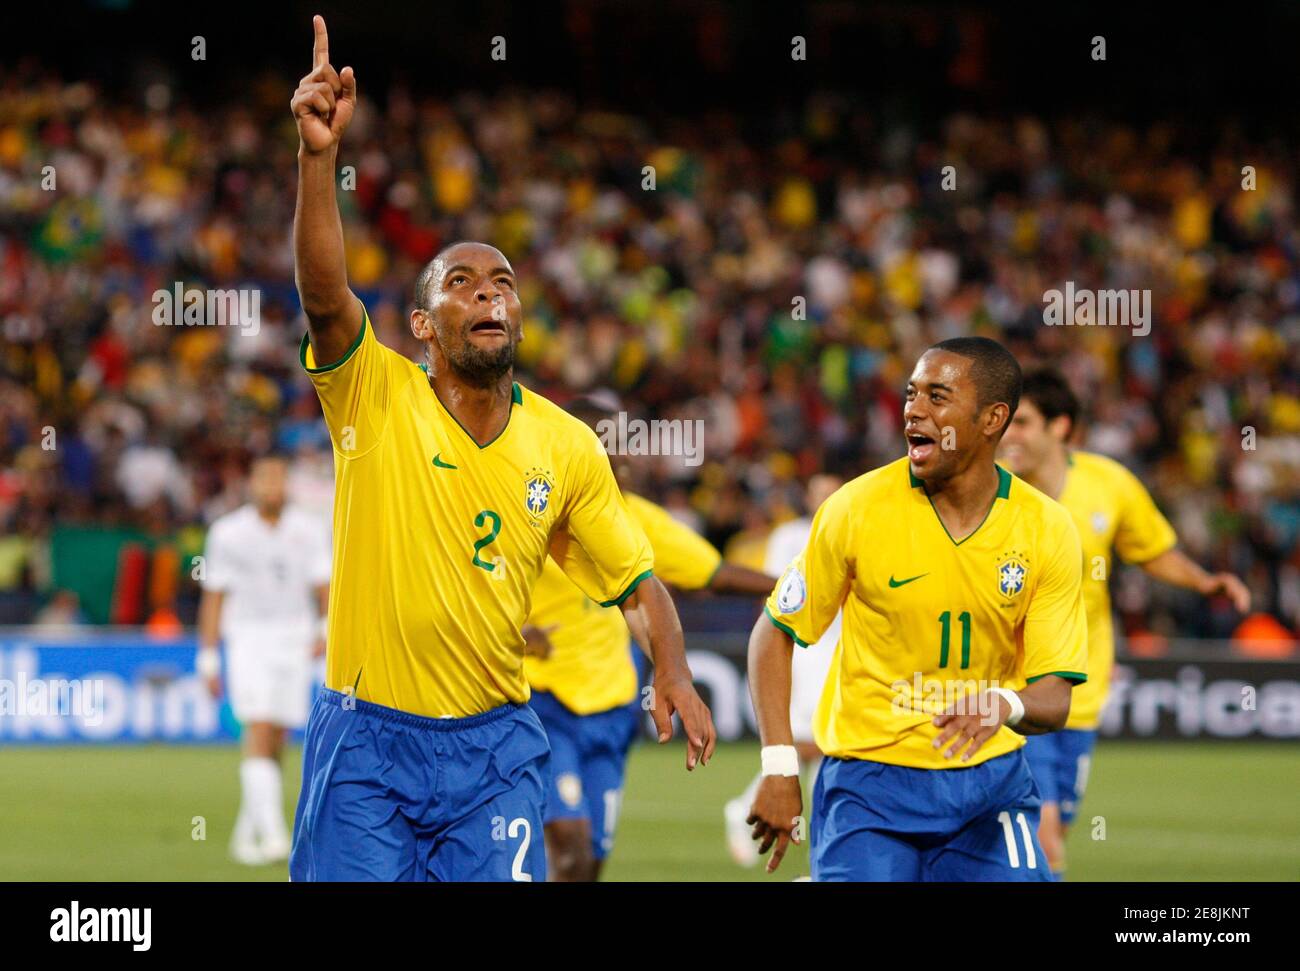 Brazil's Maicon (L) celebrates with team mate Robinho after scoring during their Confederations Cup soccer match against the U.S at the Loftus Versfeld Stadium in Pretoria June 18, 2009.       REUTERS/Jerry Lampen (SOUTH AFRICA SPORT SOCCER) Stock Photo